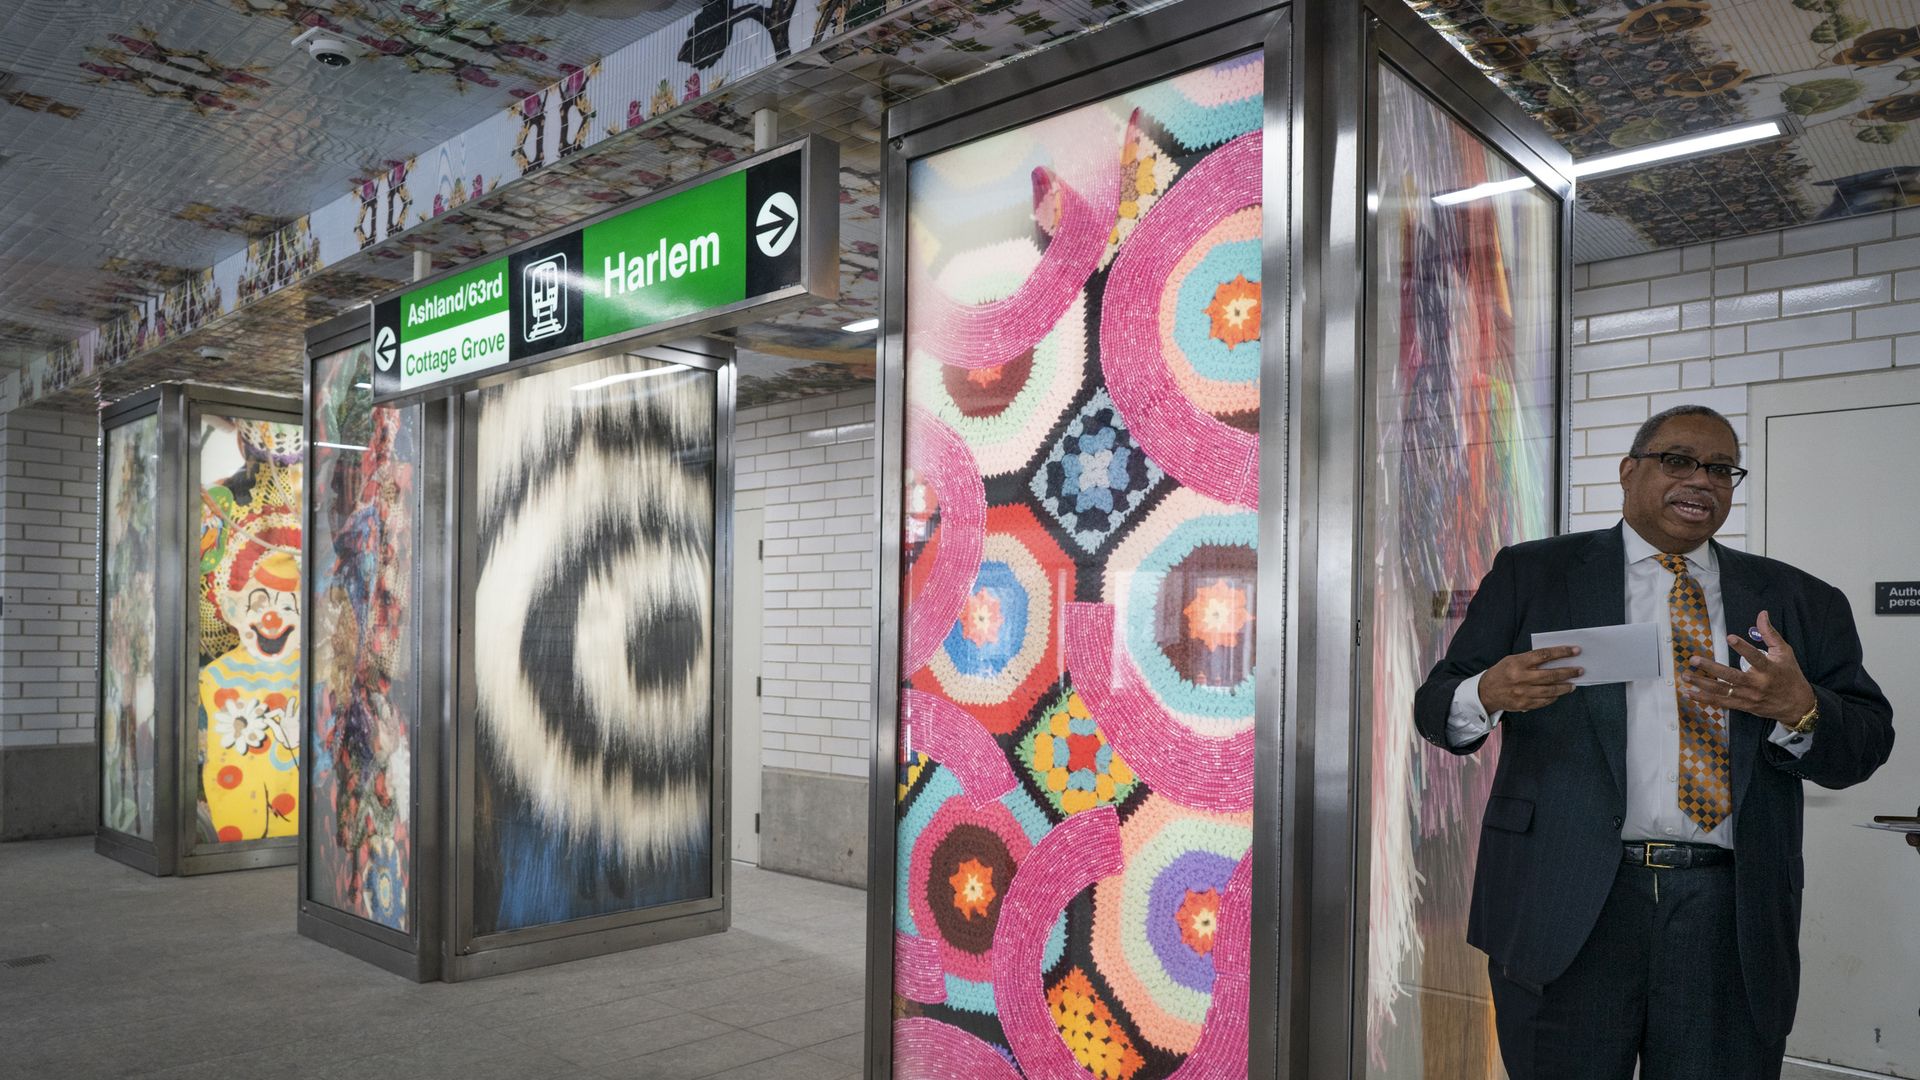 Multi-colored panels in a train station with a man in a suit to the right.